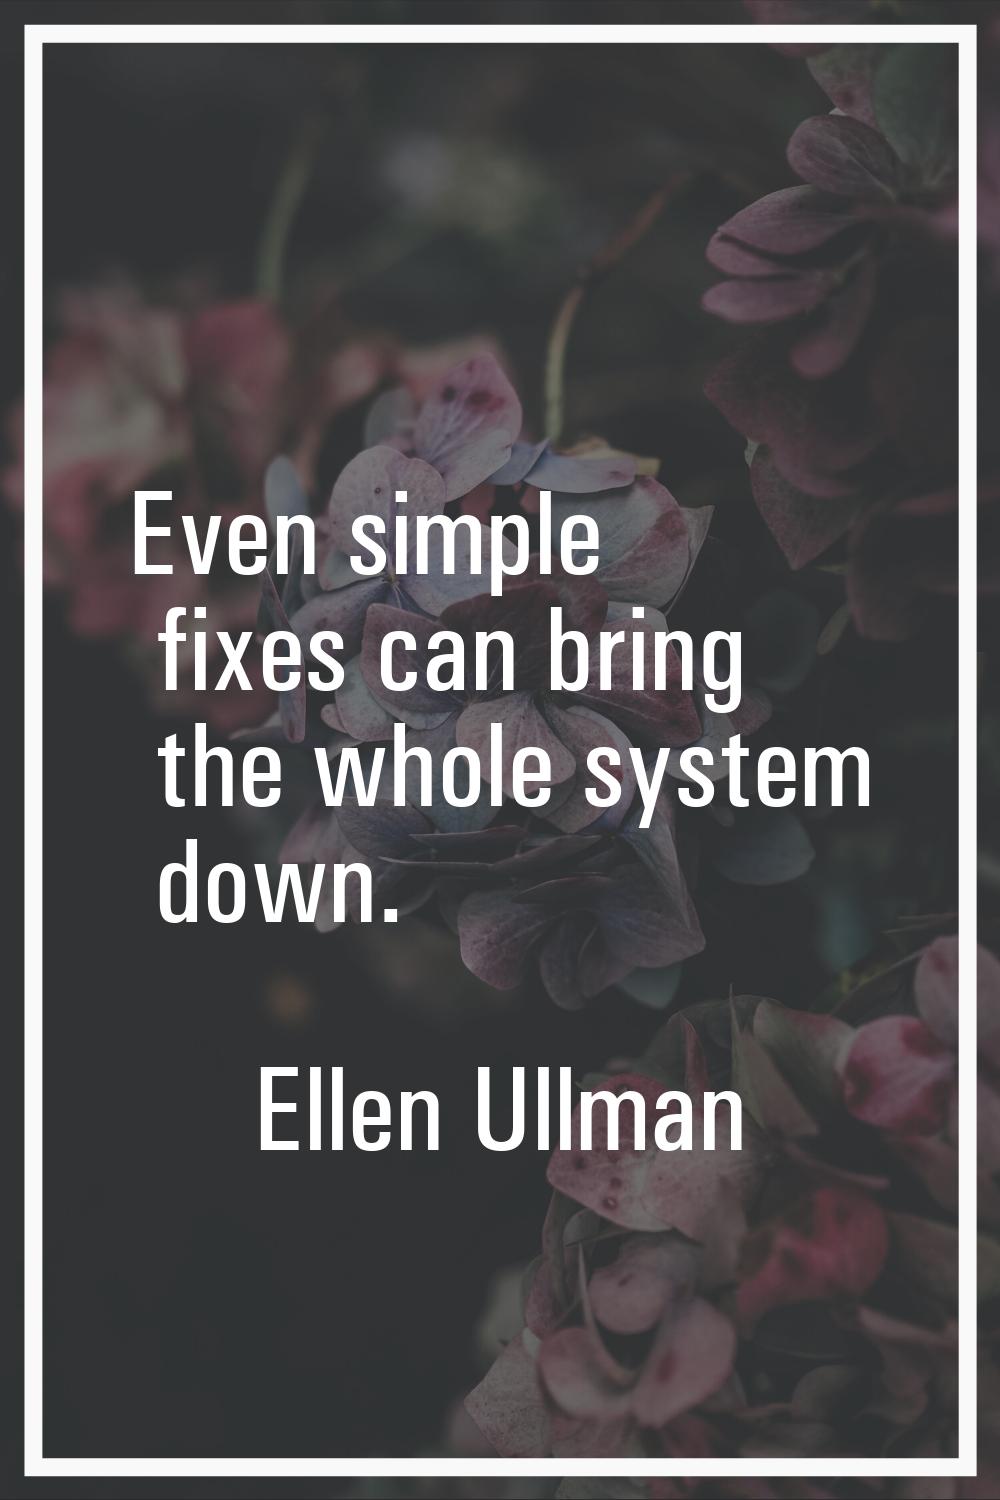 Even simple fixes can bring the whole system down.